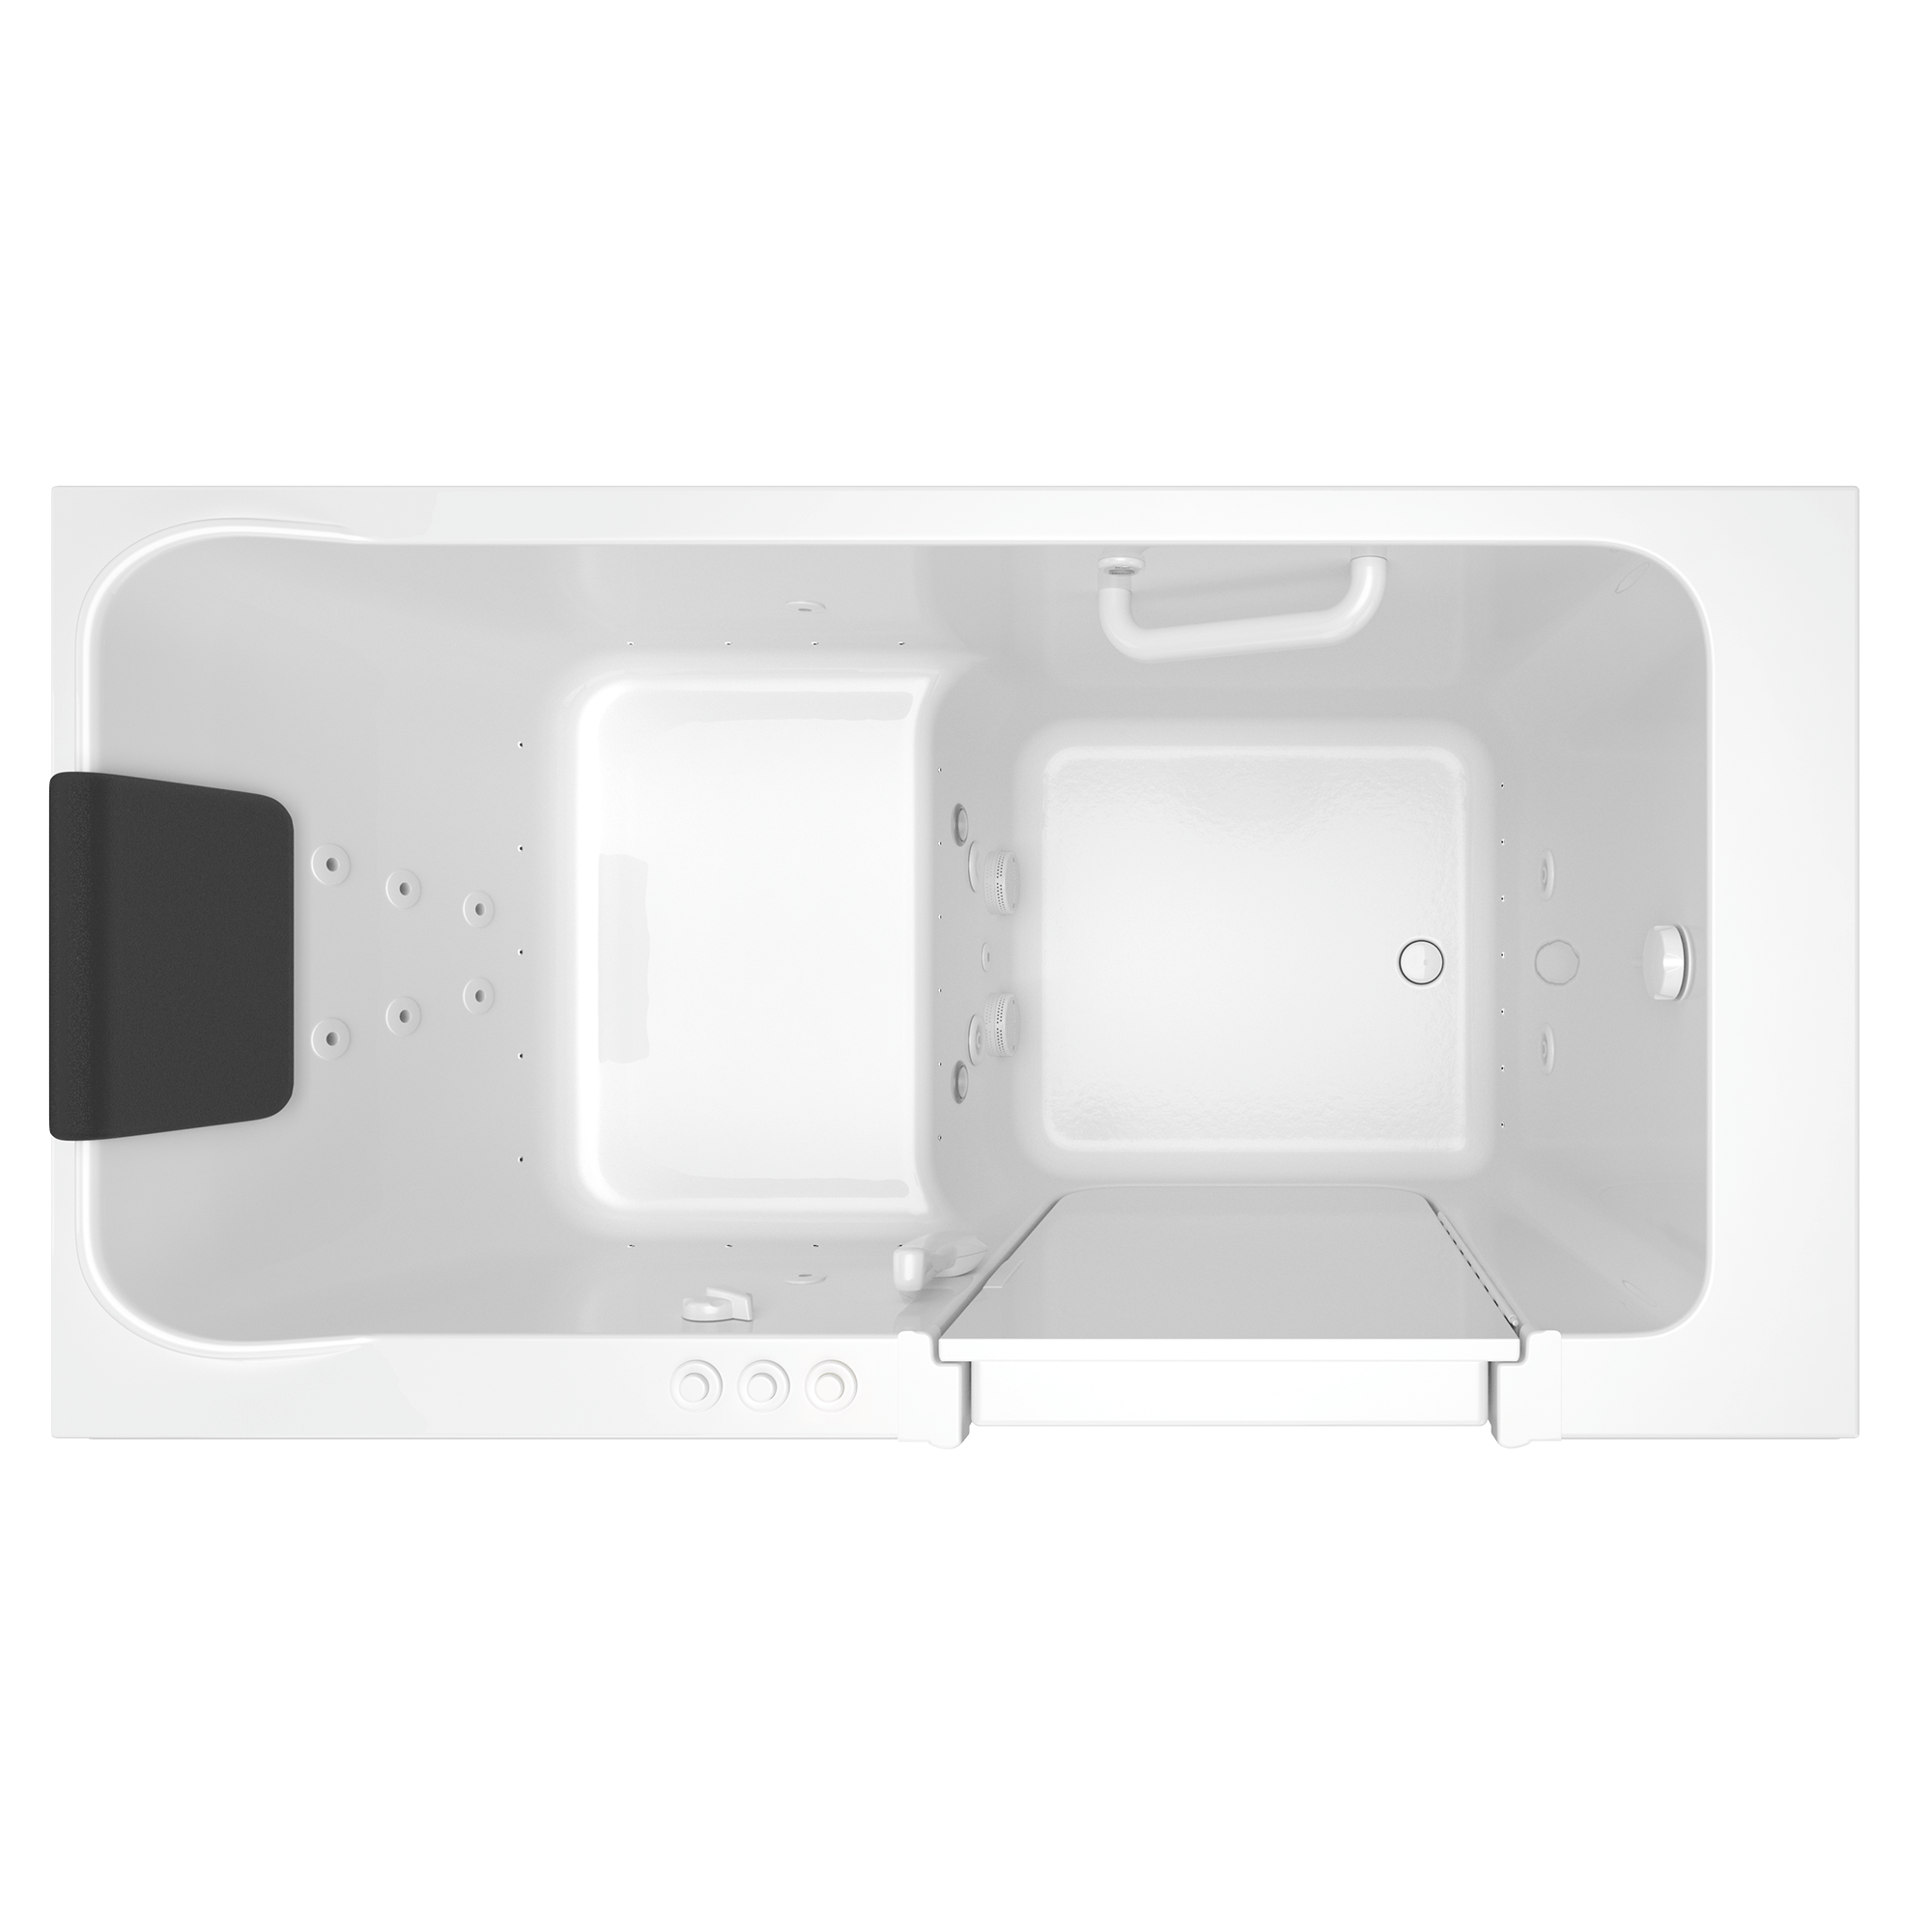 Acrylic Luxury Series 32 x 60 -Inch Walk-in Tub With Combination Air Spa and Whirlpool Systems - Right-Hand Drain